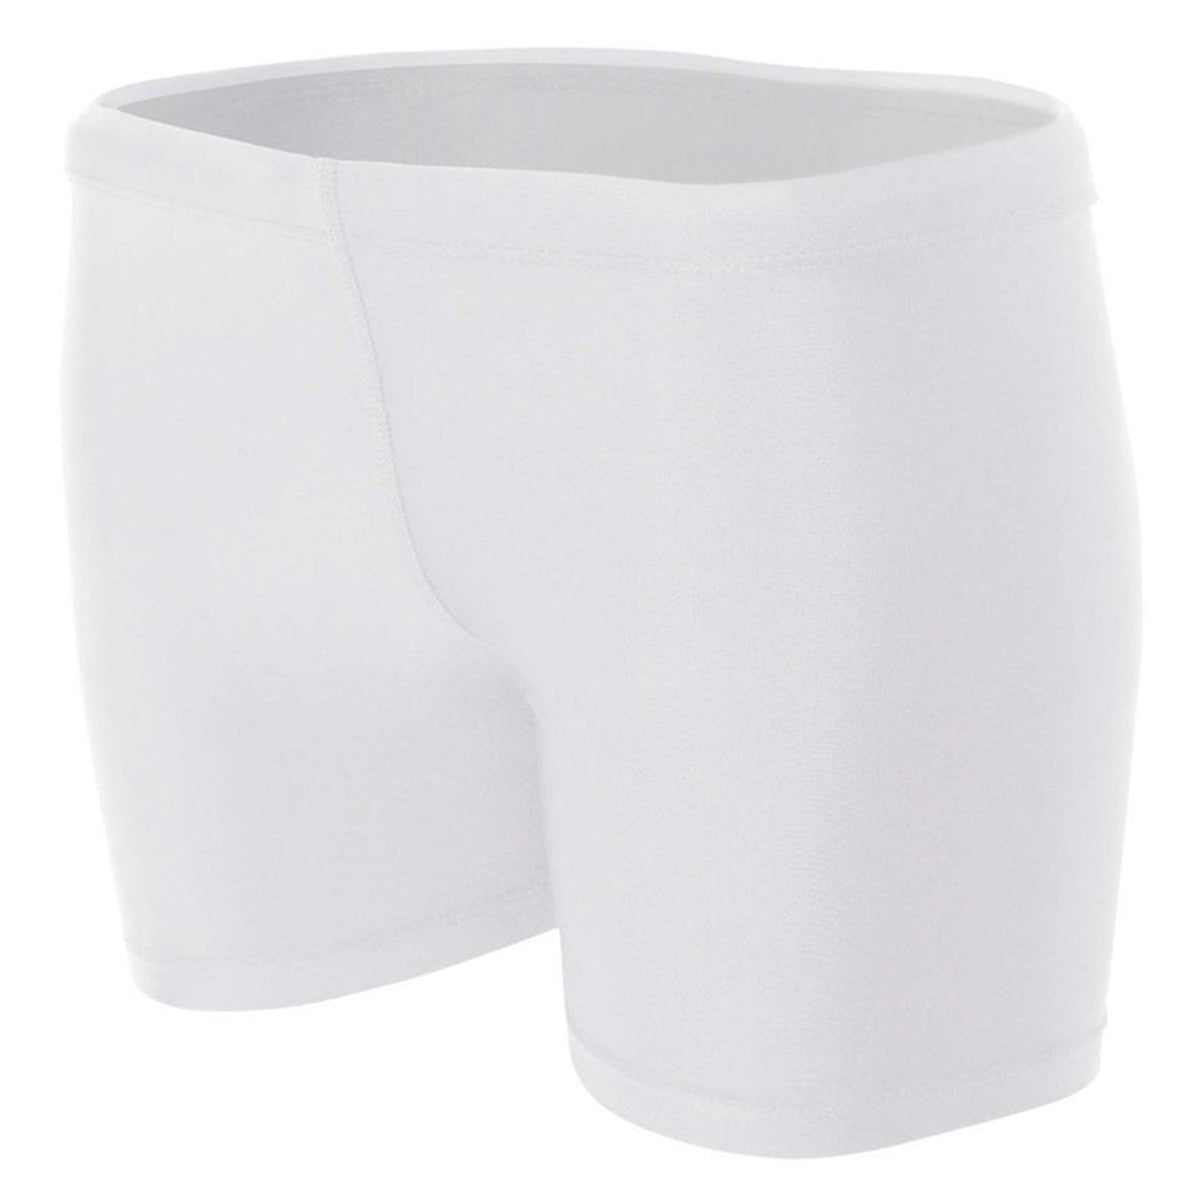 A4 Women's 4" Compression Shorts Shorts Alleson Athletic White X-Small 